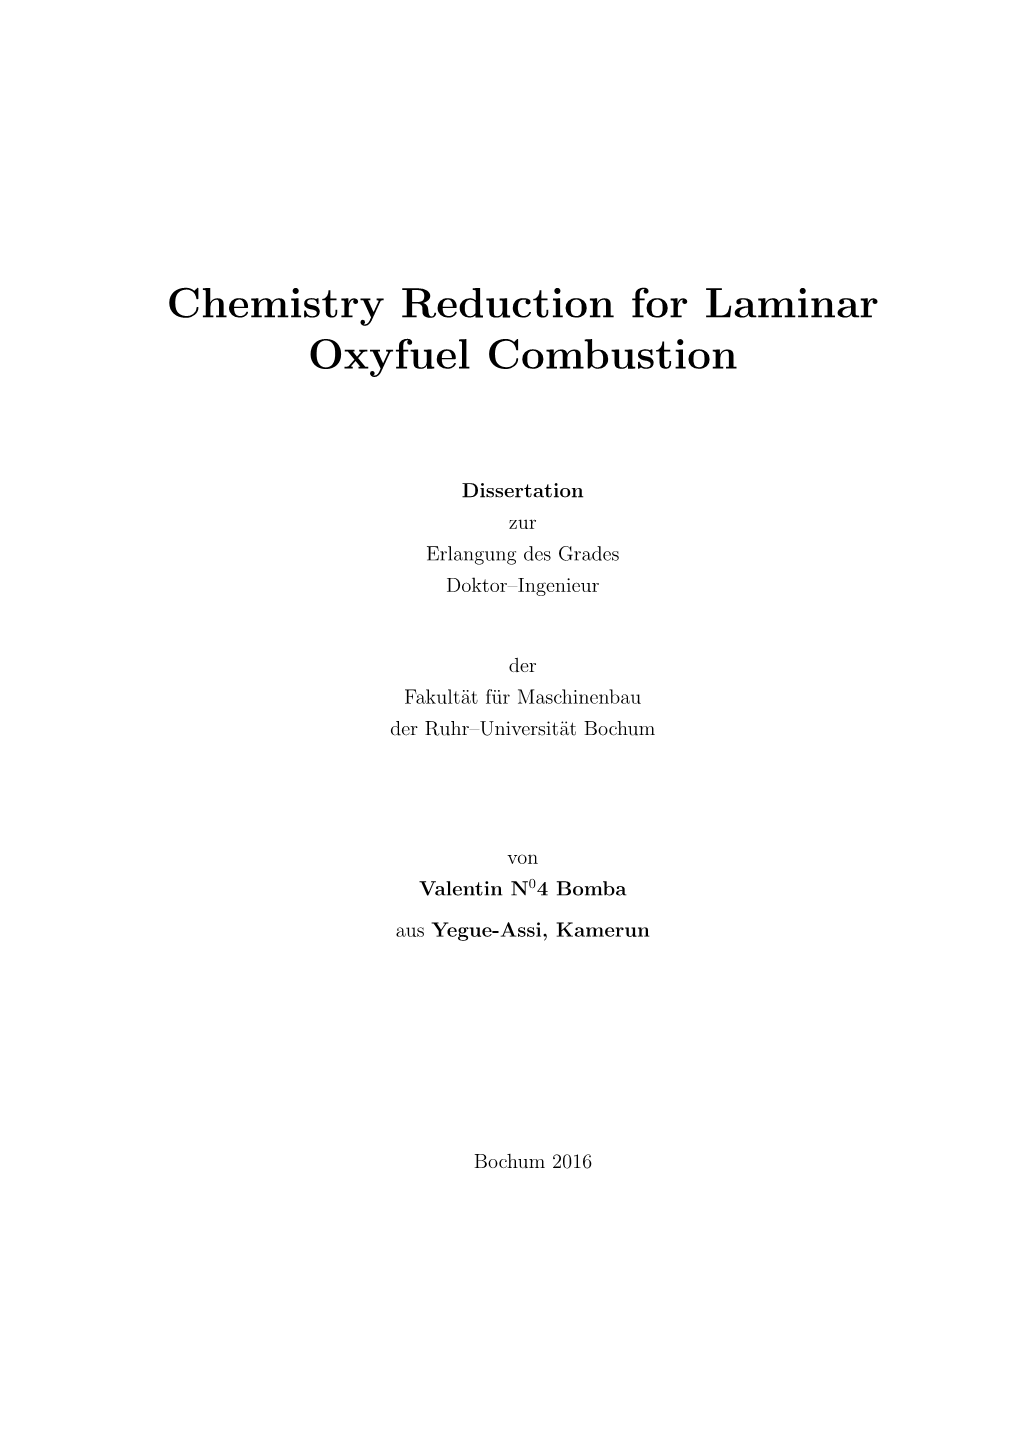 Chemistry Reduction for Laminar Oxyfuel Combustion